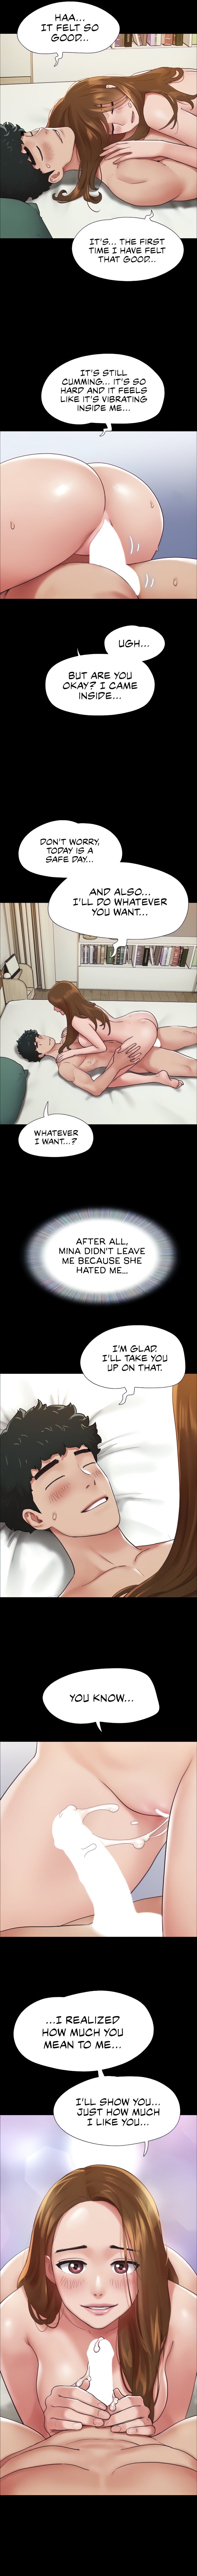 not-to-be-missed-chap-8-3